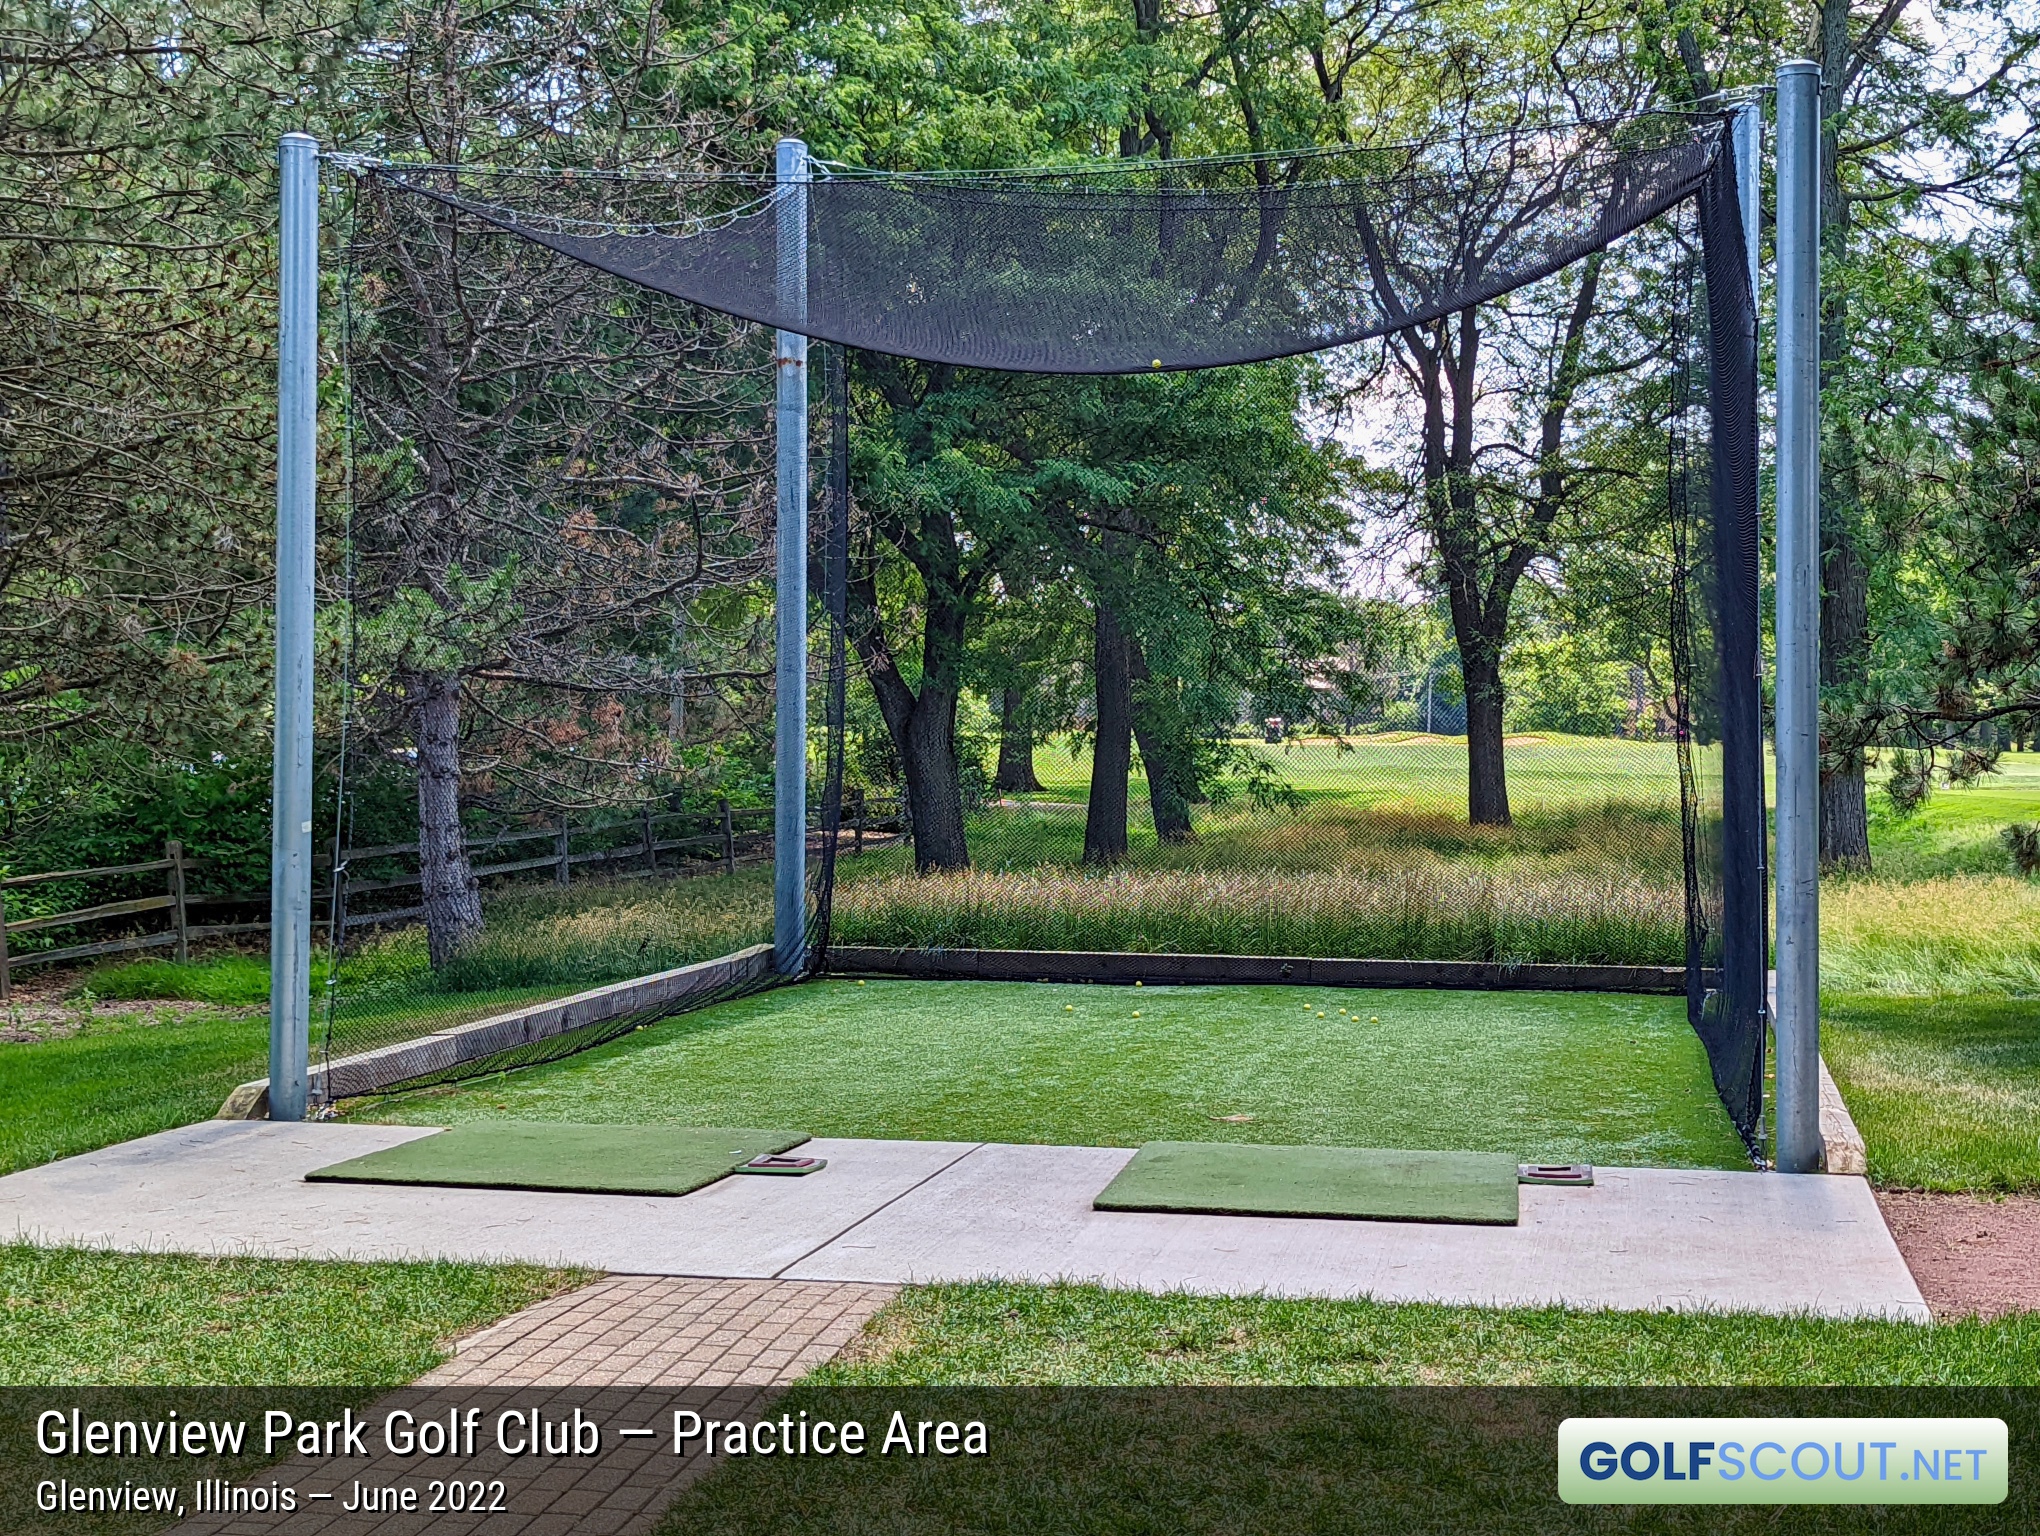 Photo of the practice area at Glenview Park Golf Club in Glenview, Illinois. 